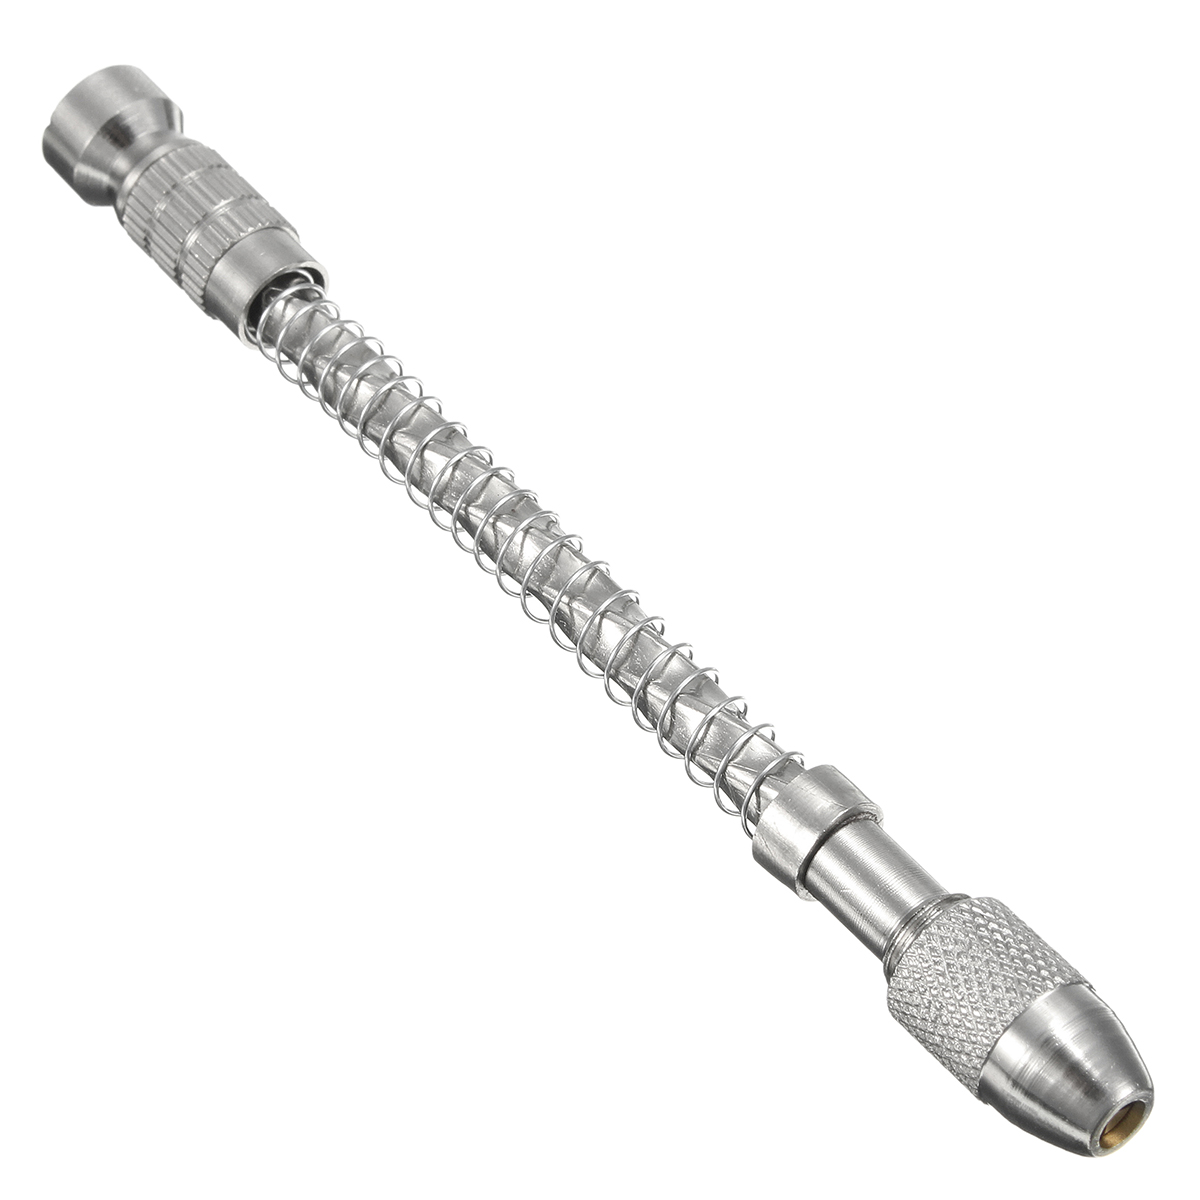 Raitooltrade-DT03-Aluminum-Alloy-Mini-Spiral-Hand-Hold-Punching-Manual-Drill-Craft-DIY-Tool-1084289-13